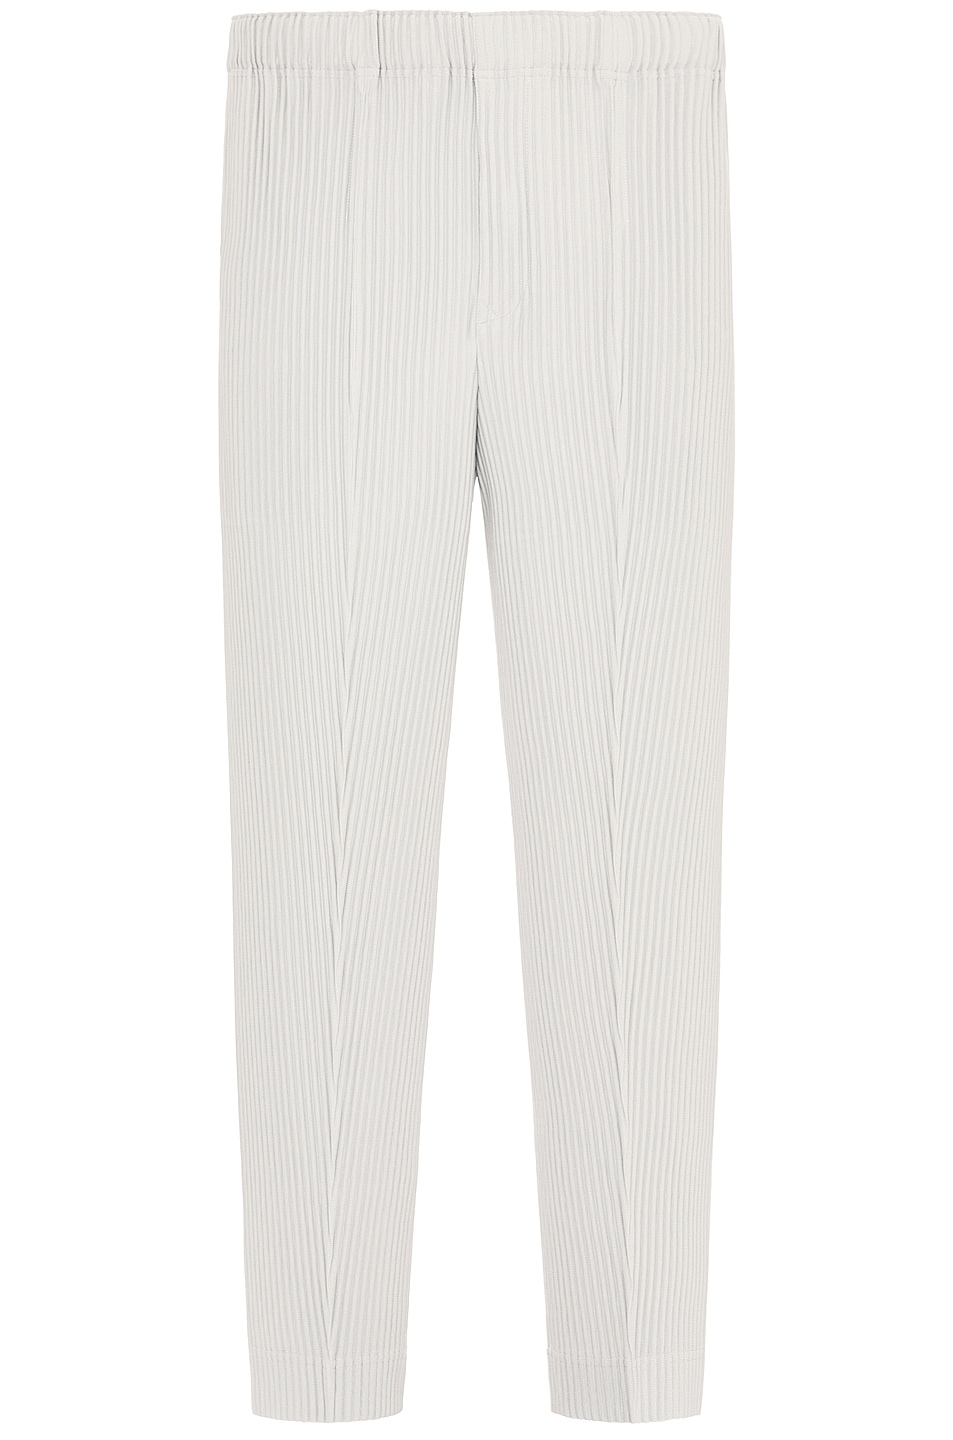 Image 1 of Homme Plisse Issey Miyake Pants in Light Gray